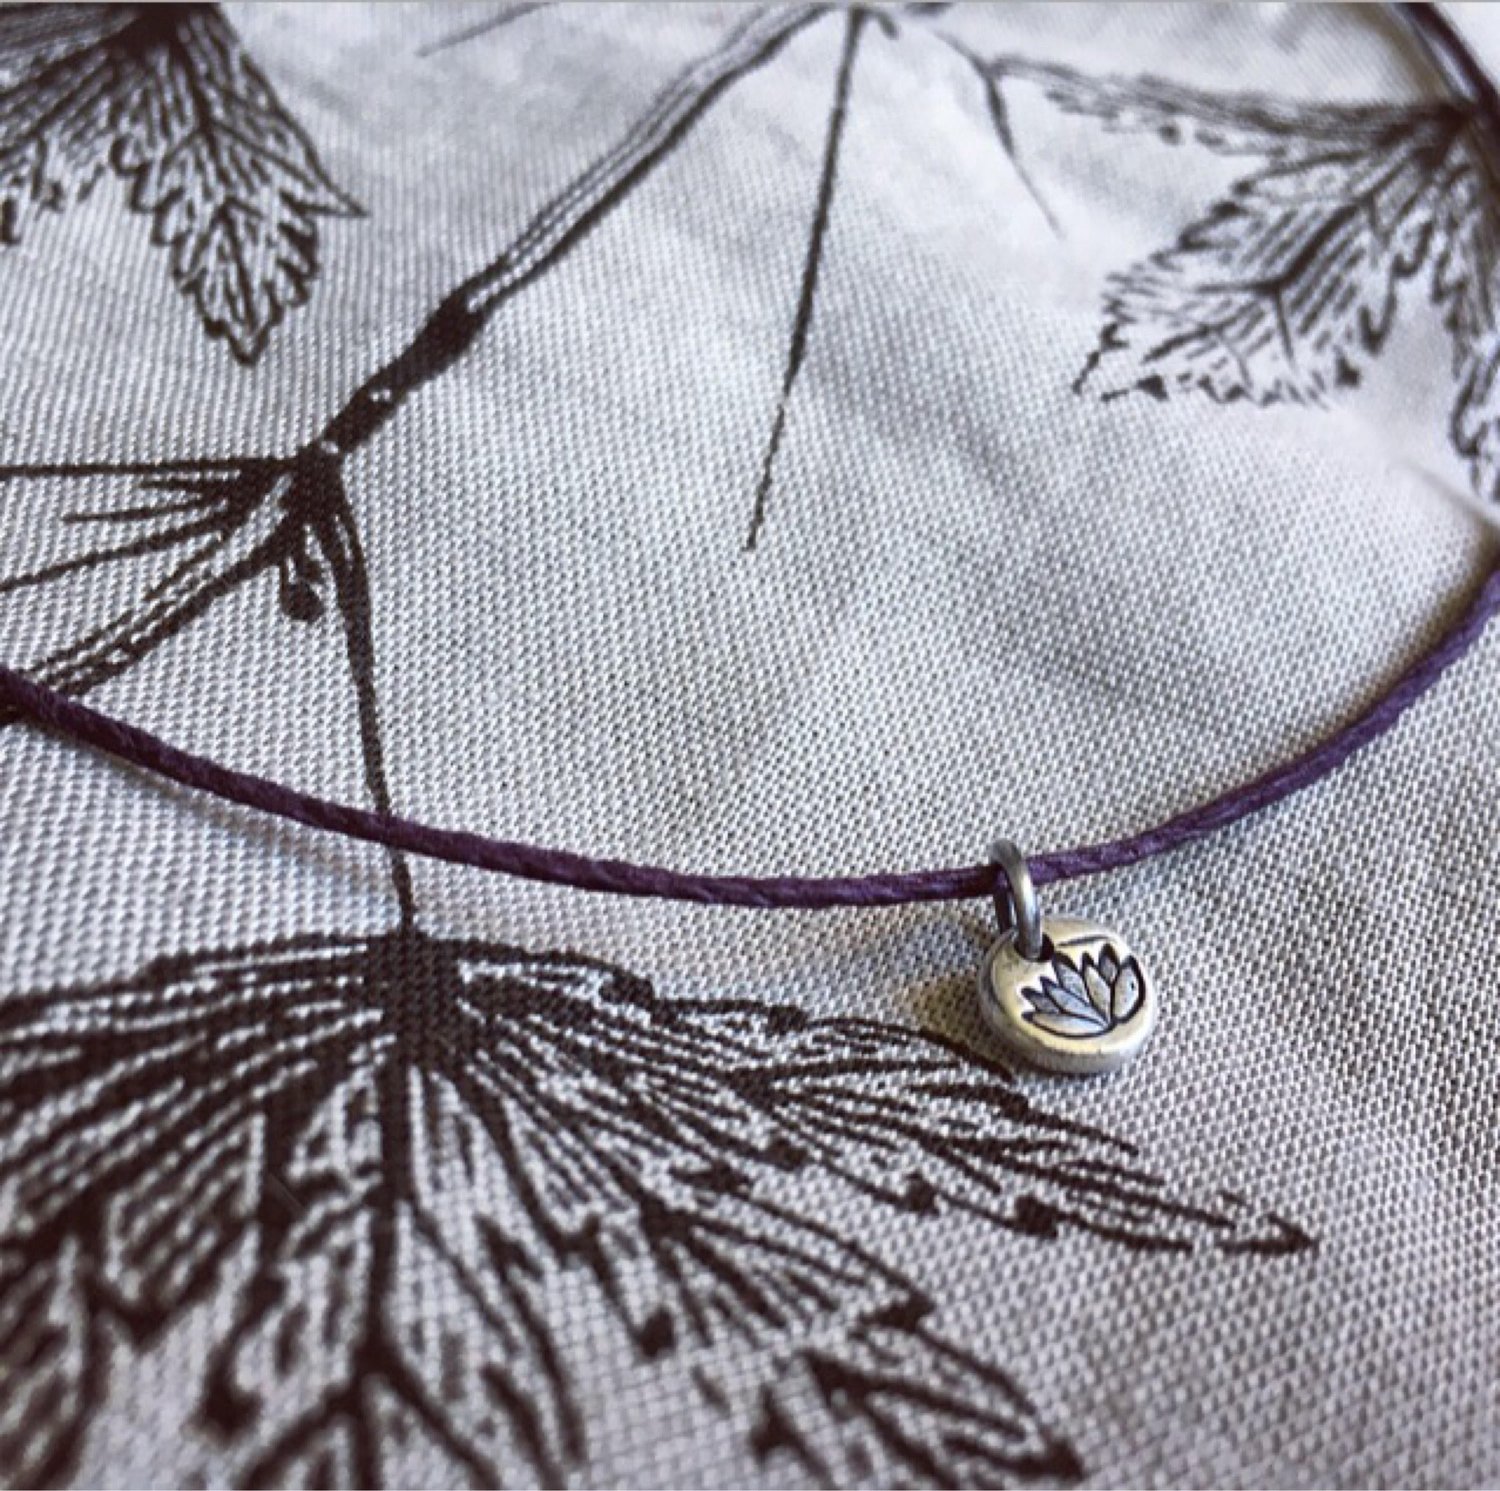 Image of Lotus flower charm necklace. Handmade silver charm, waxed hemp cord adjustable necklace